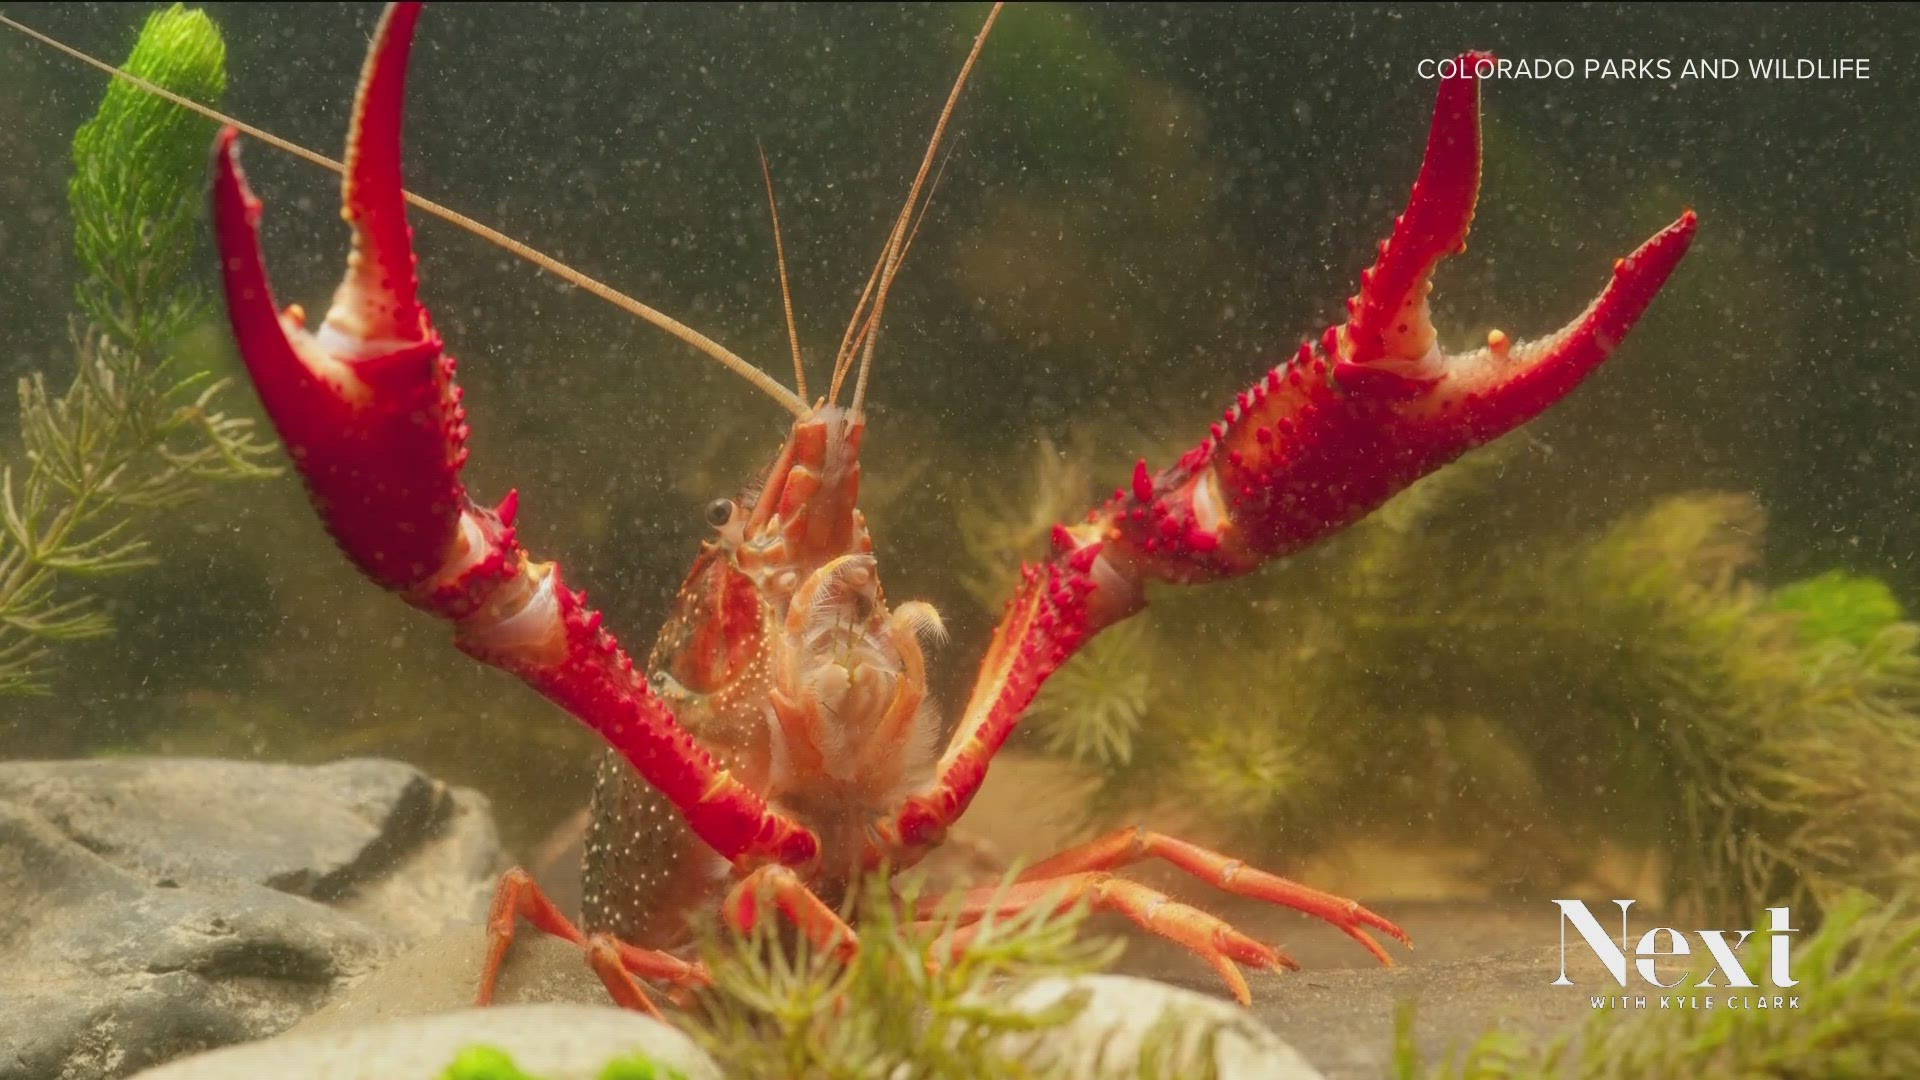 Red swamp crayfish importation, possession now legal in Colorado